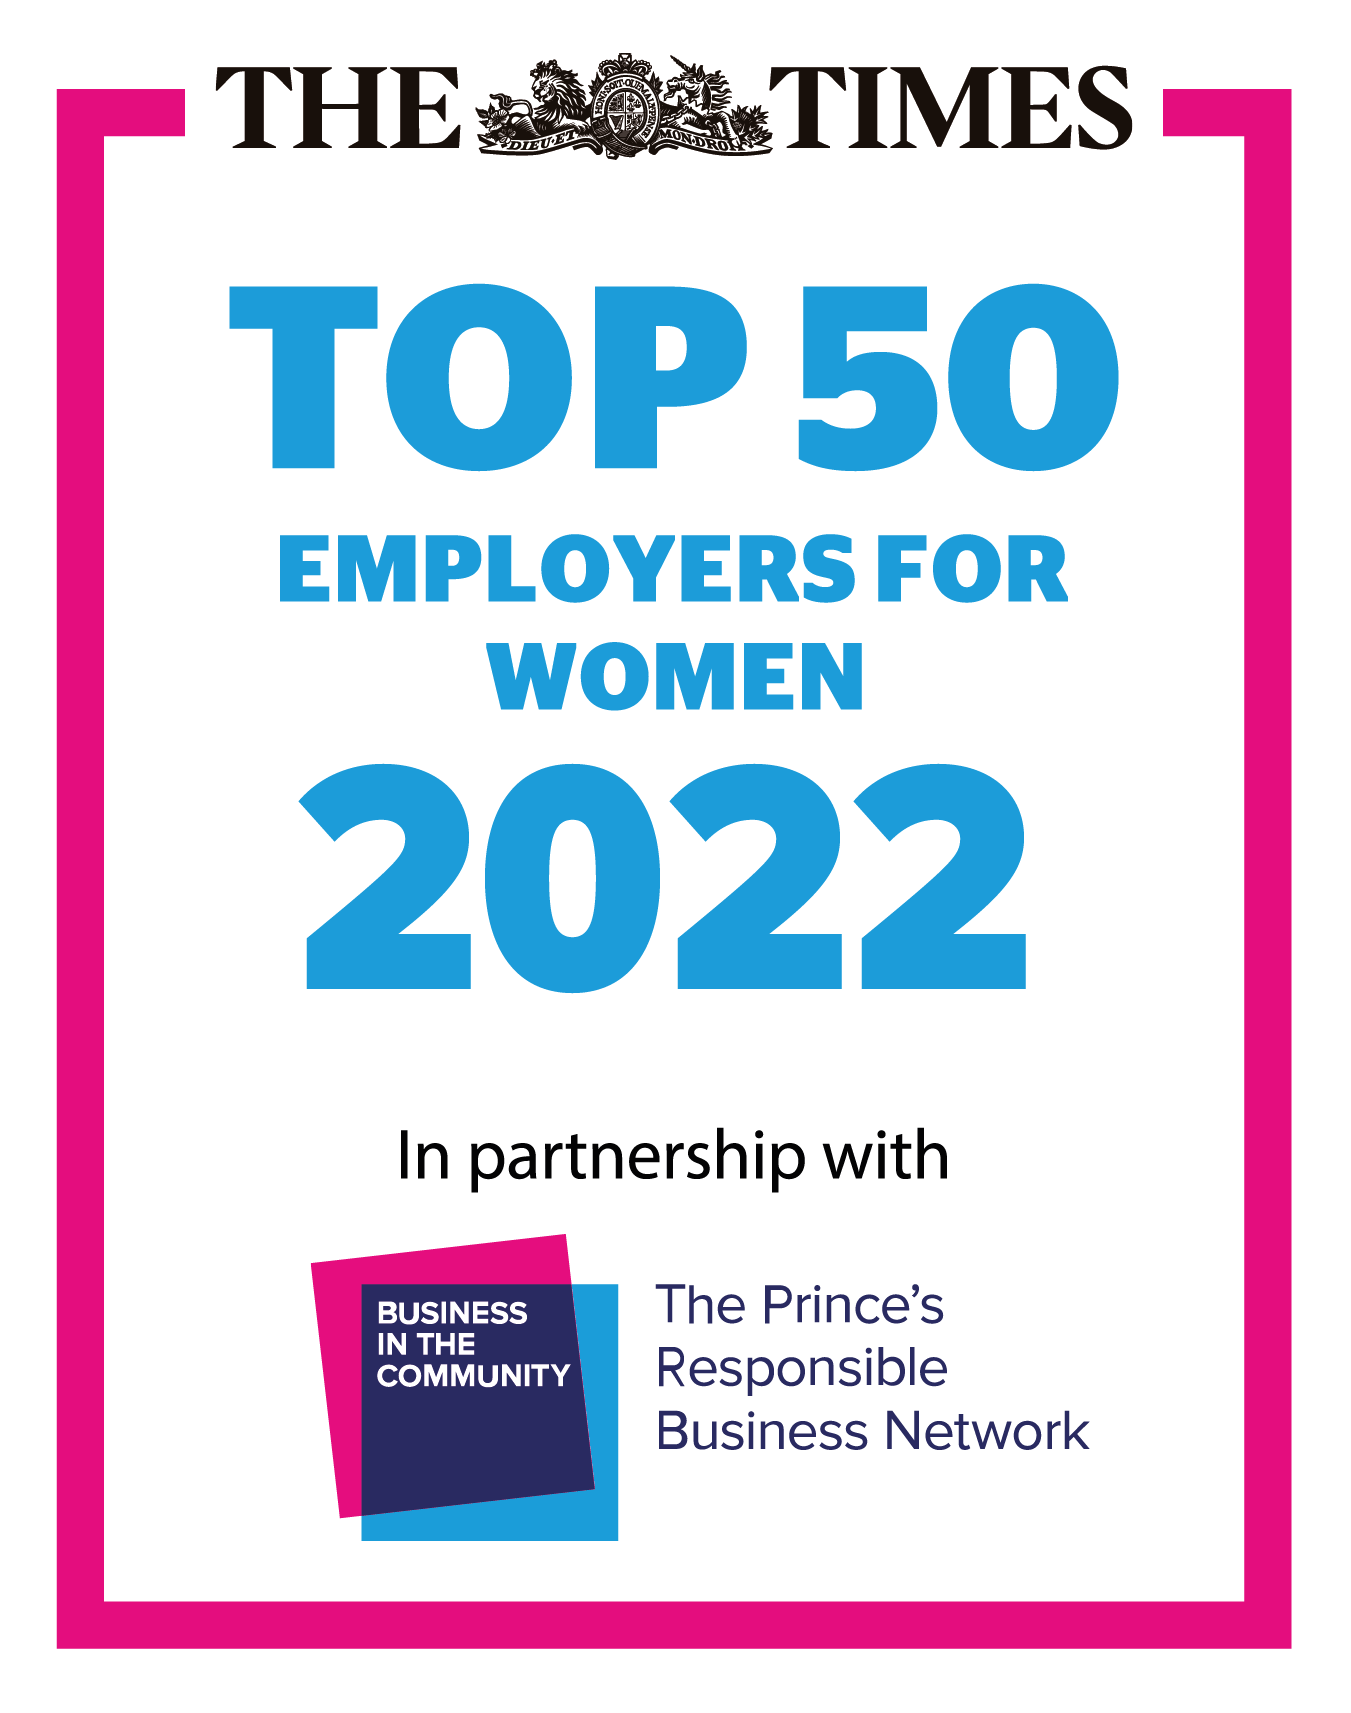 The Times Top 50 Employers For Women 2022